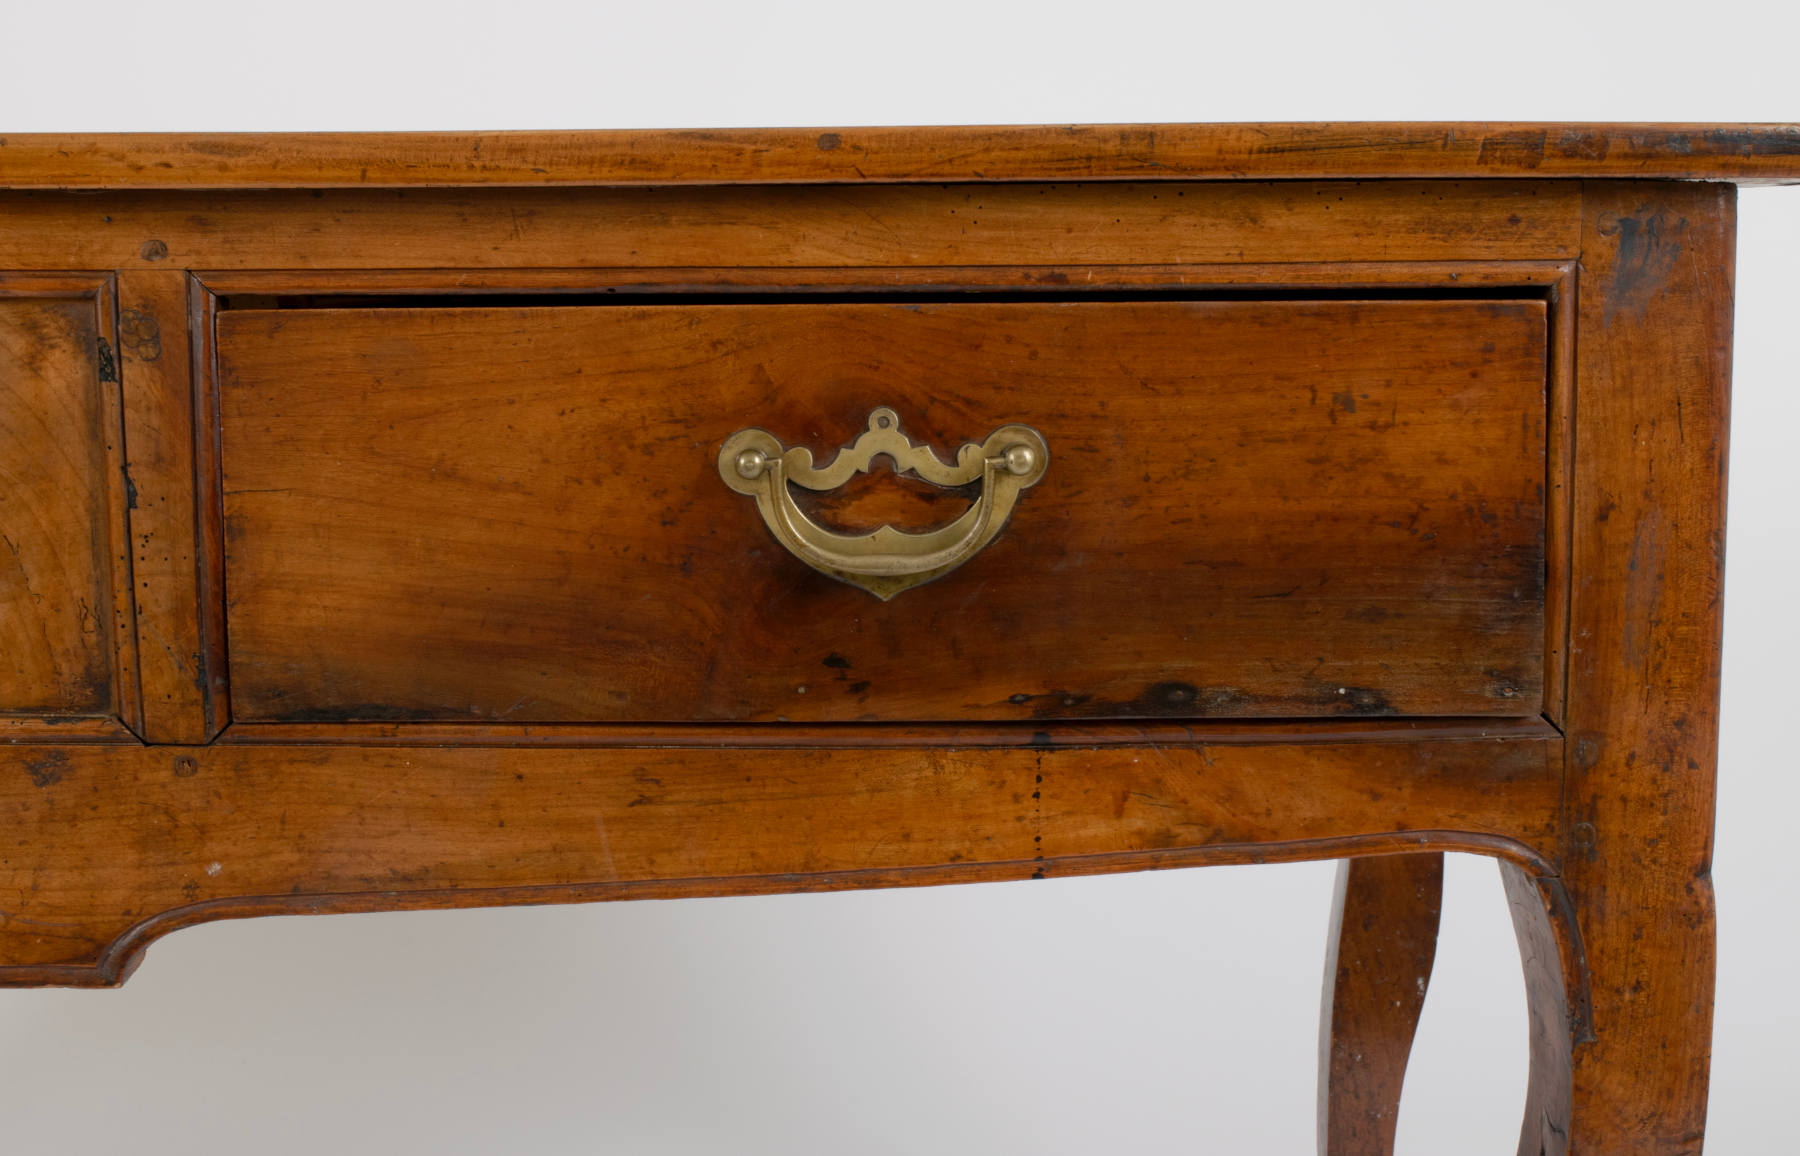 Provincial Cherry Console table, 1840